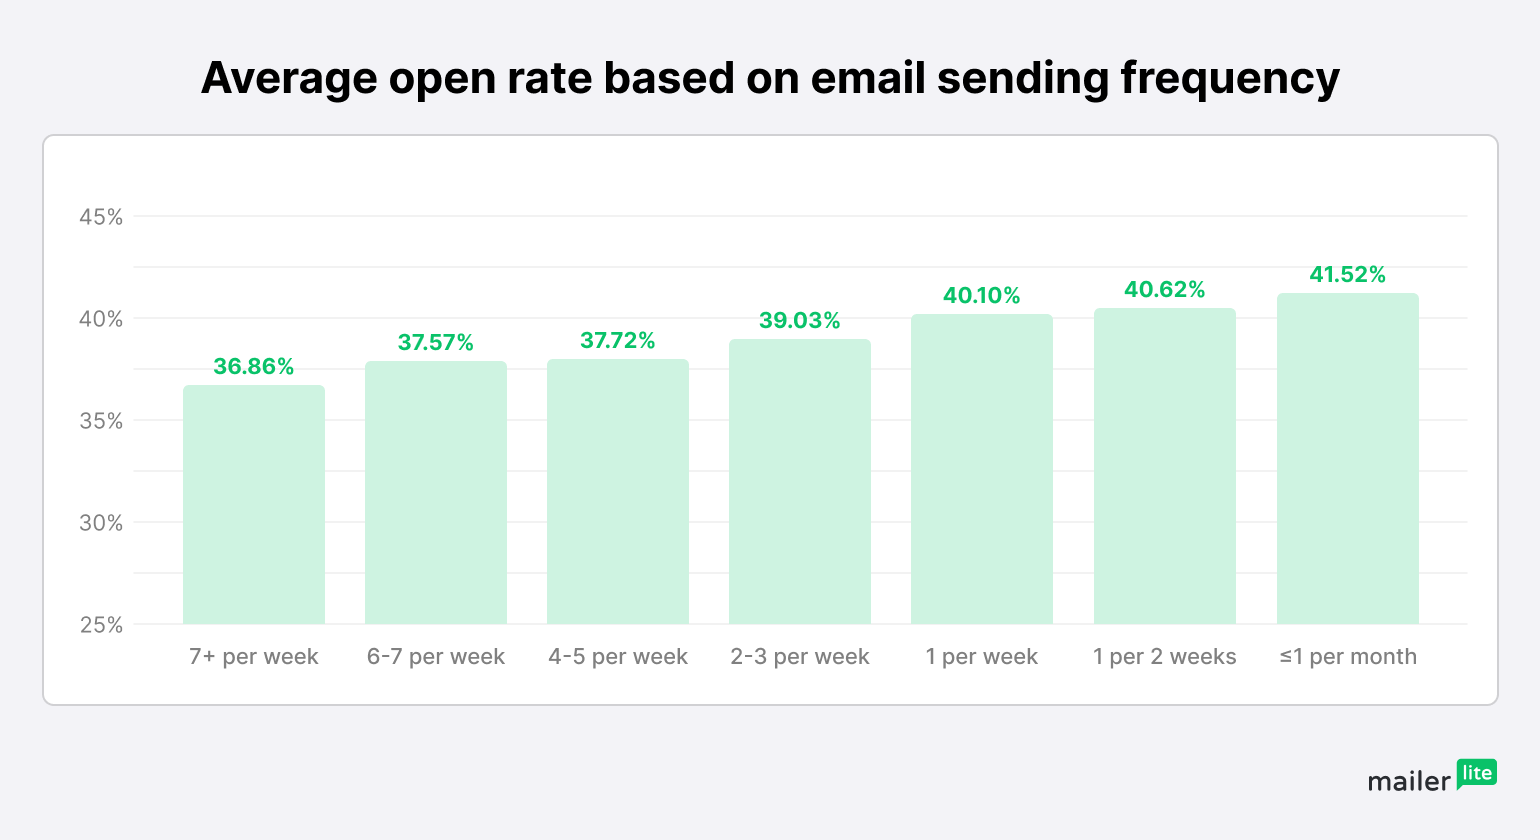 Graph showing average open rate based on email sending frequency